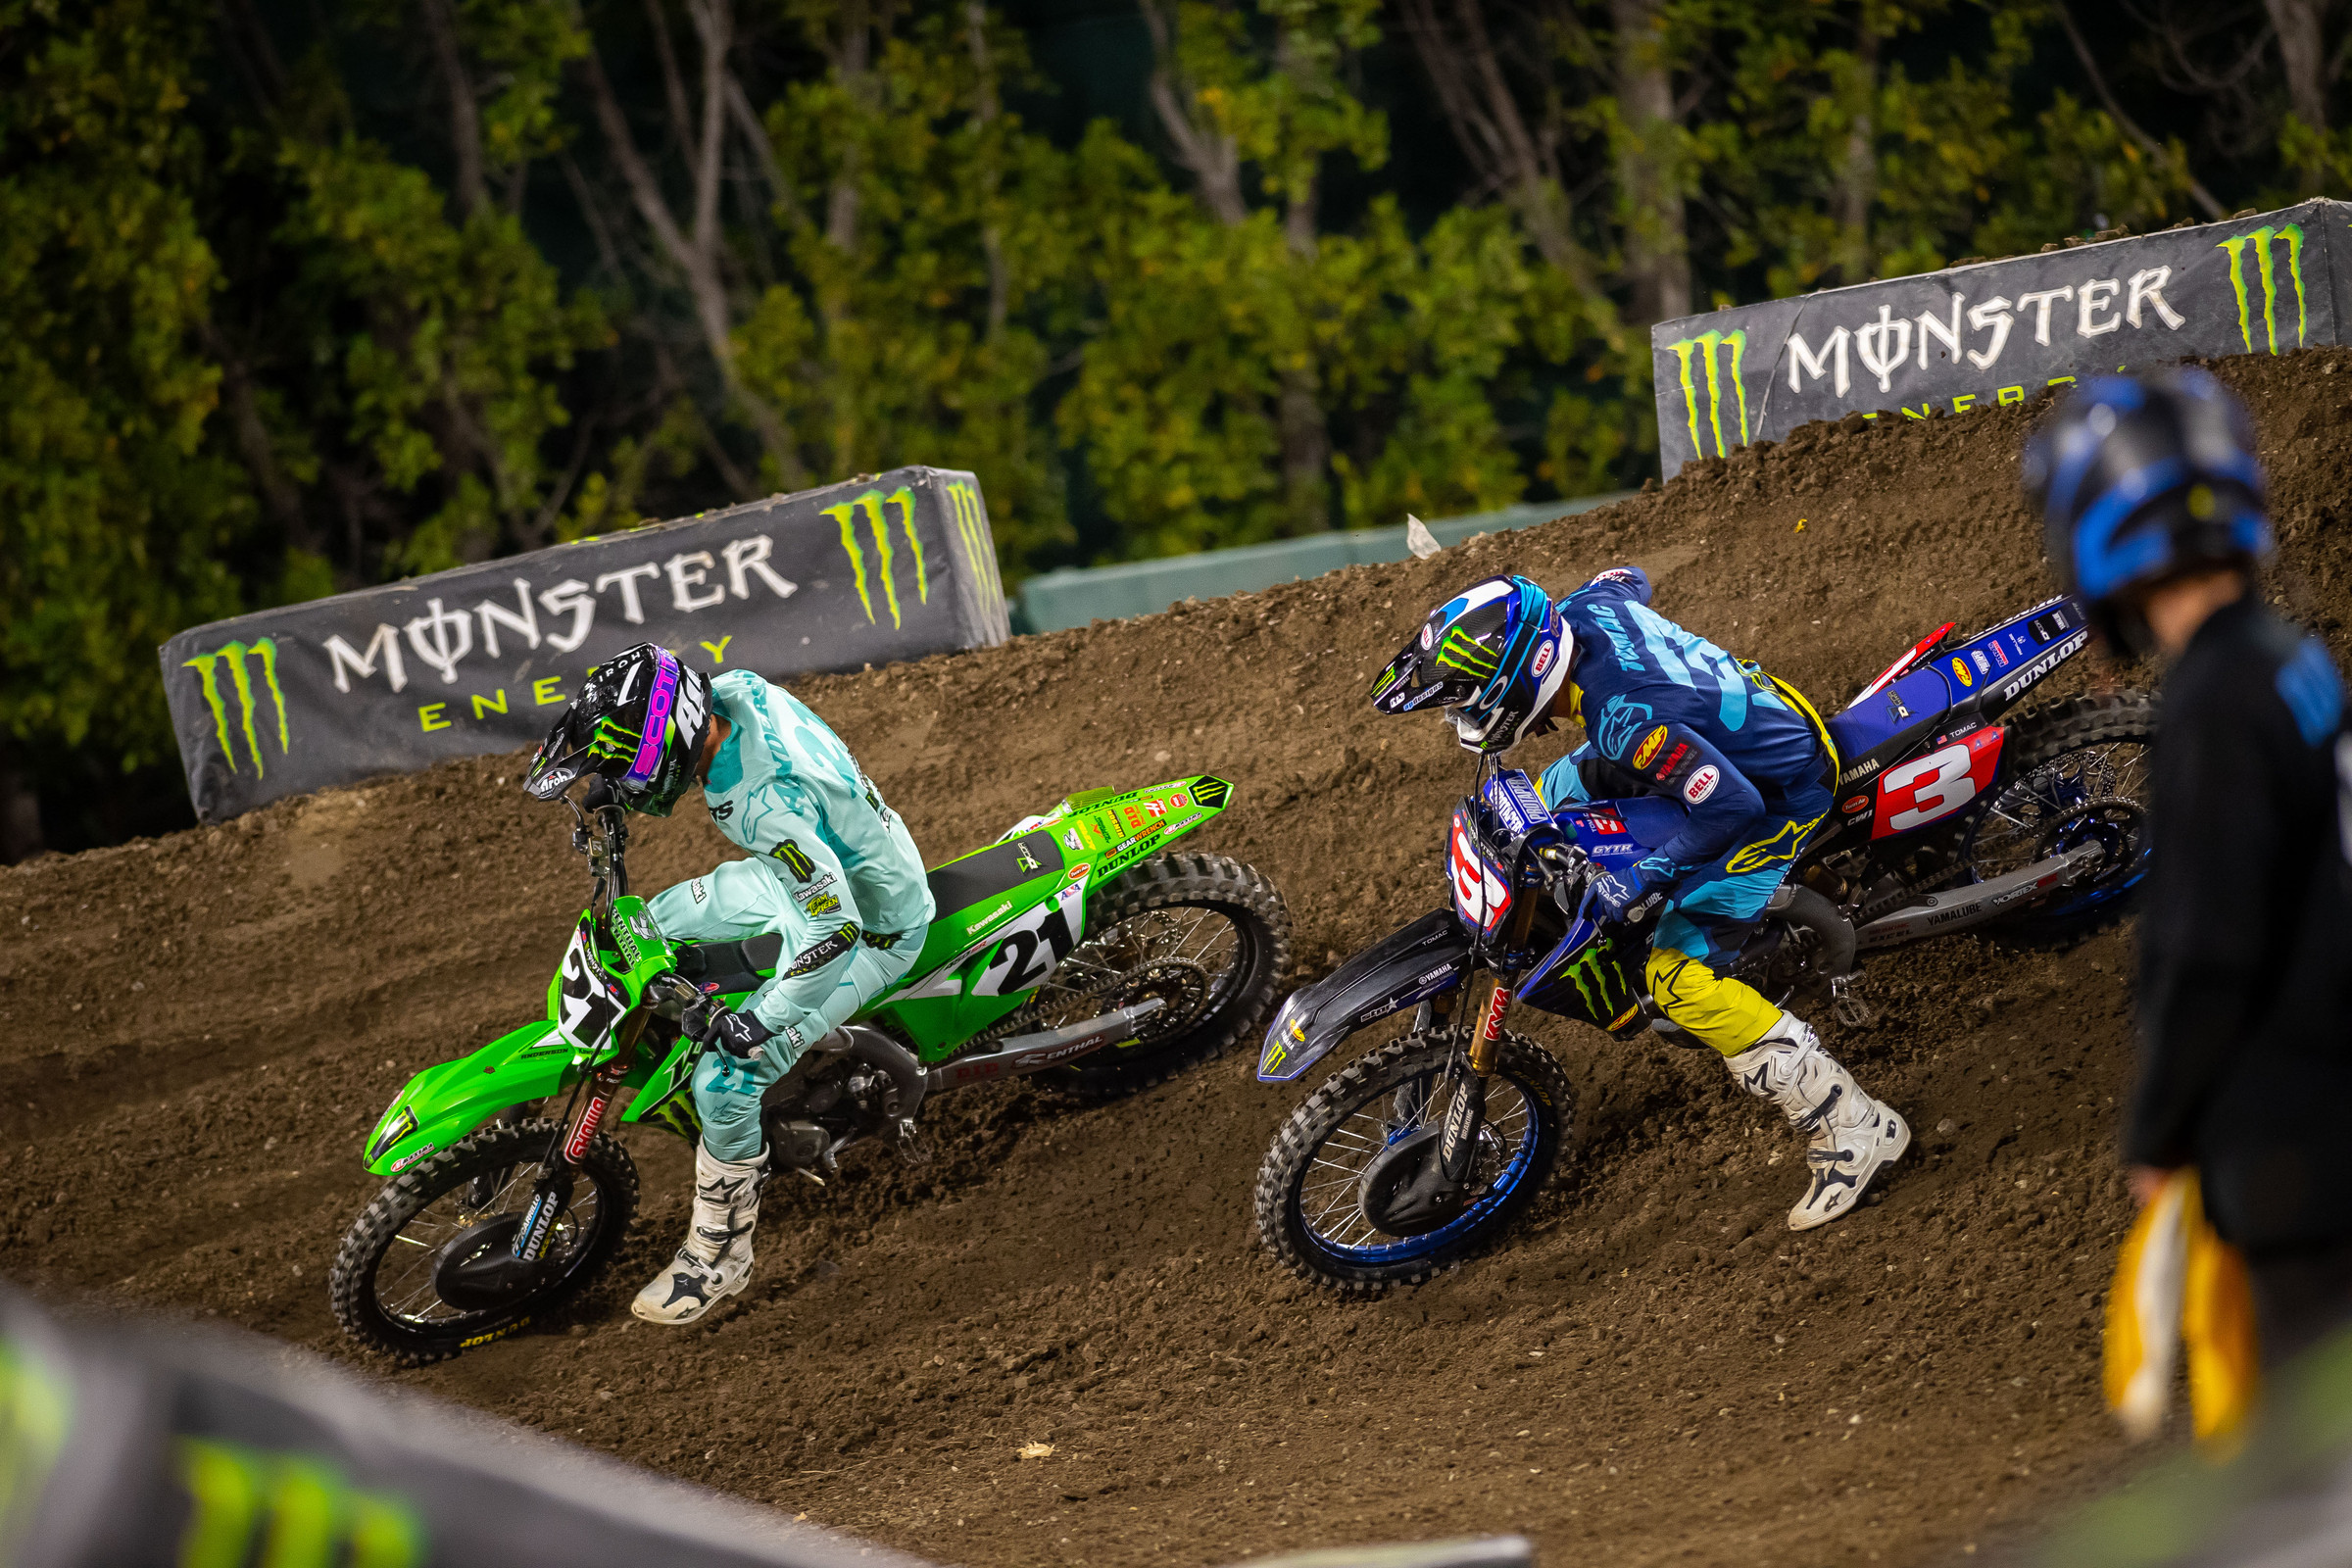 2022 Anaheim 3 Supercross Full Race Recap and Results